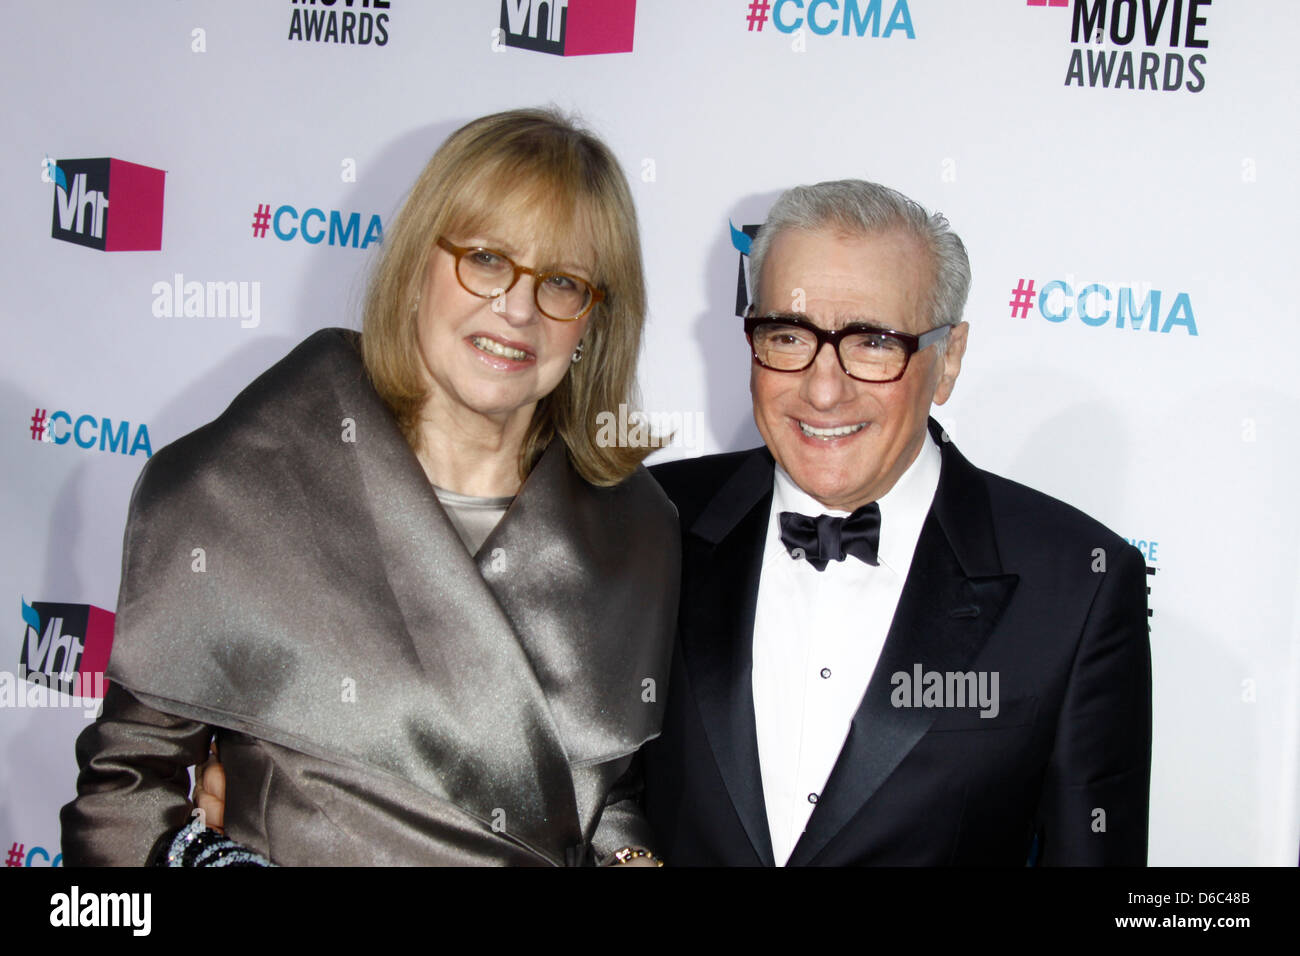 Director Martin Scorsese and his wife, producer Helen Morris arrive at the 17th Annual Critics' Choice Movie Awards at Hollywood Palladium in Los Angeles, USA, on 12 January 2012. Photo: Hubert Boesl Stock Photo